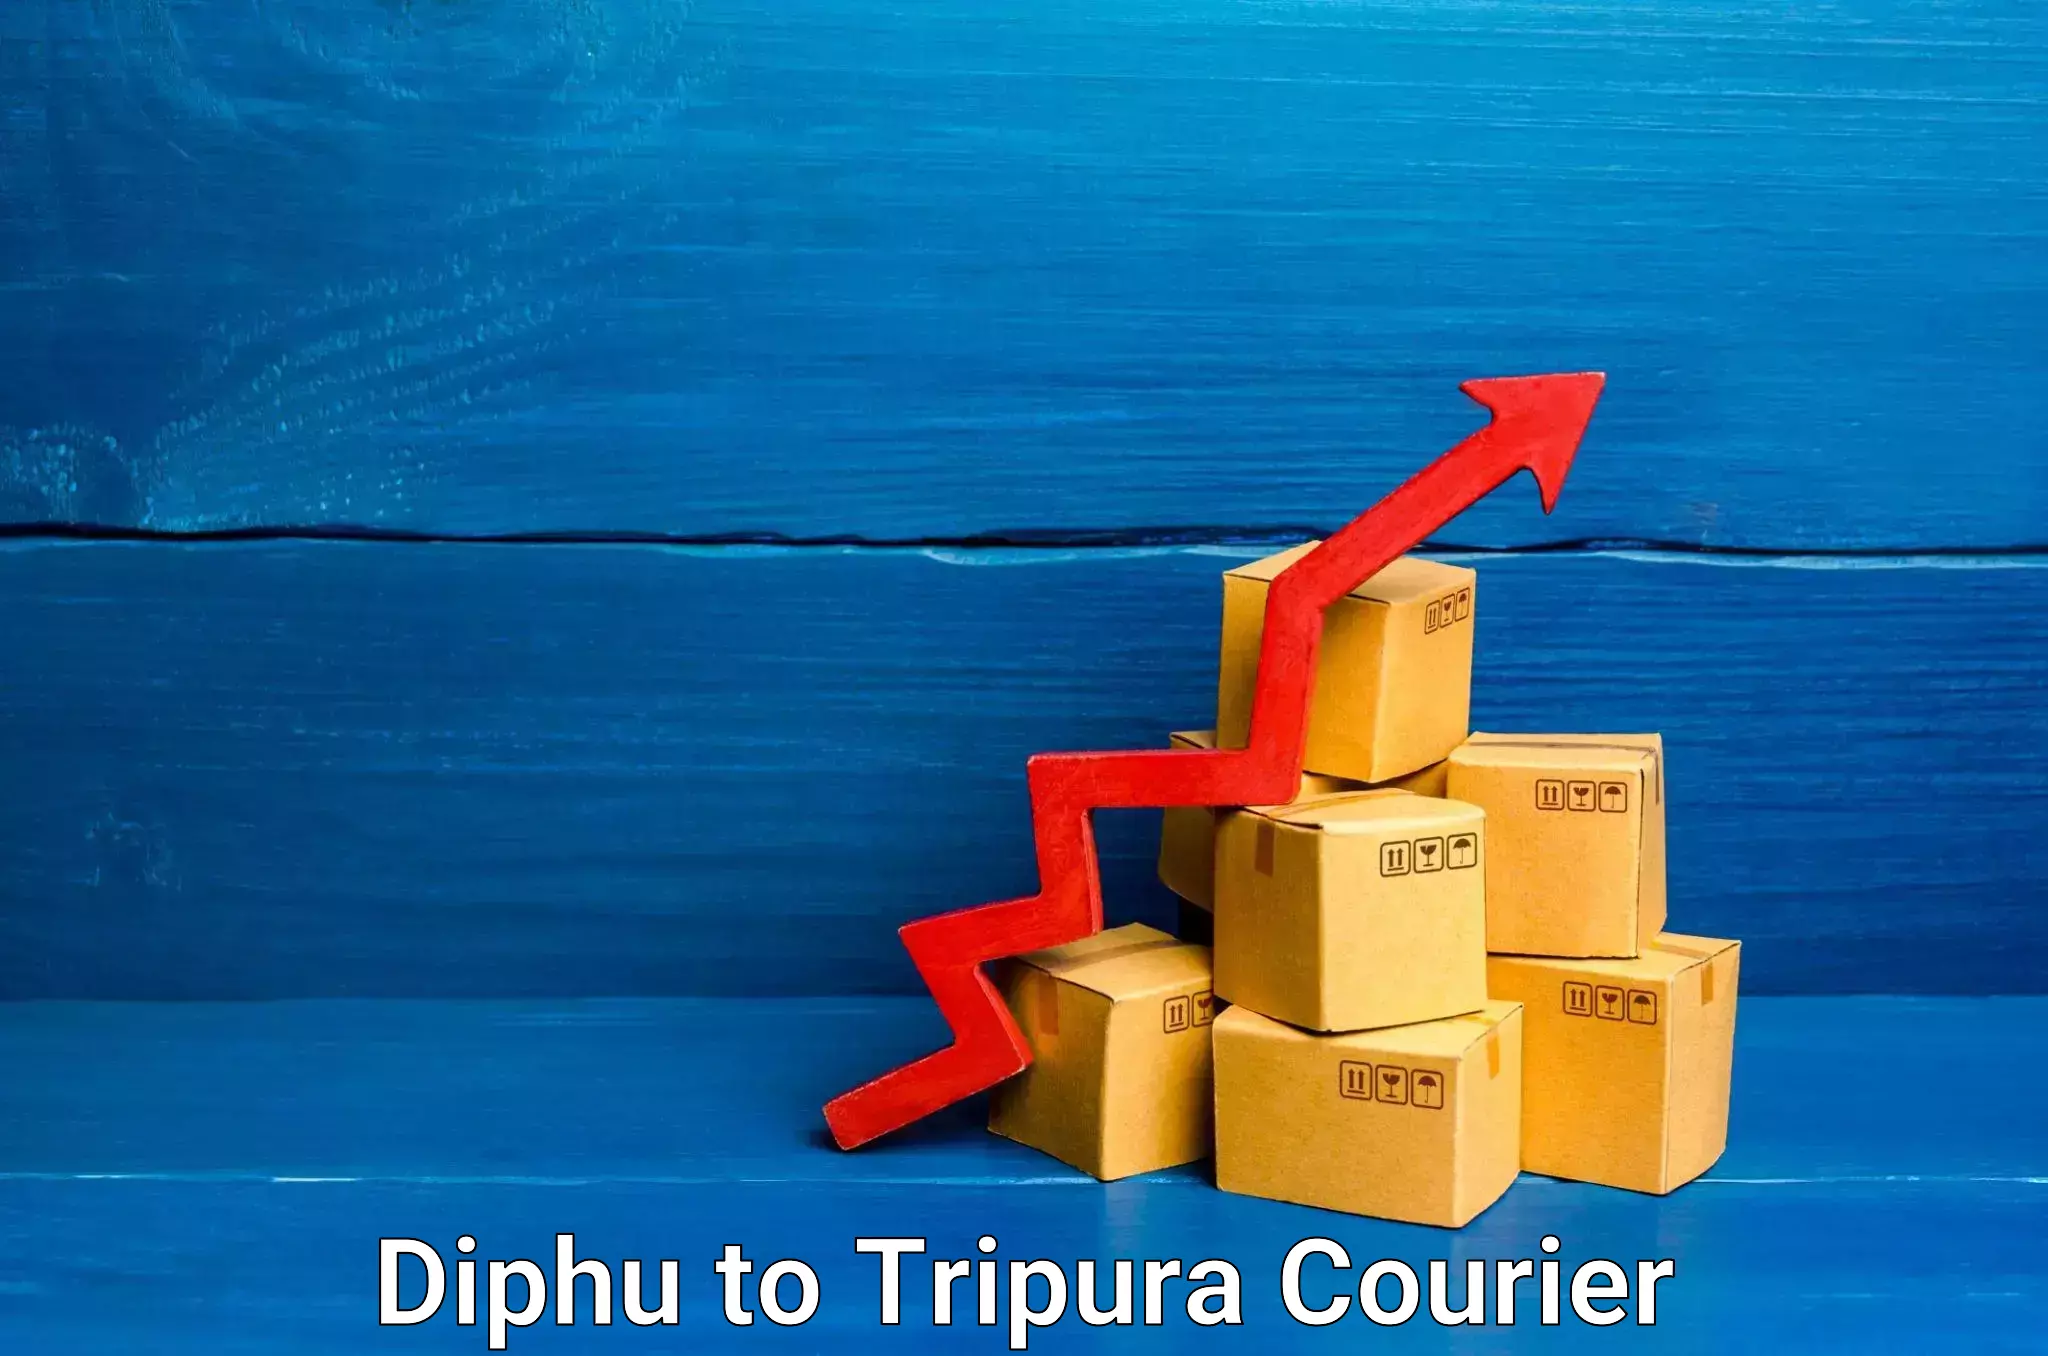 Same-day delivery solutions Diphu to Tripura